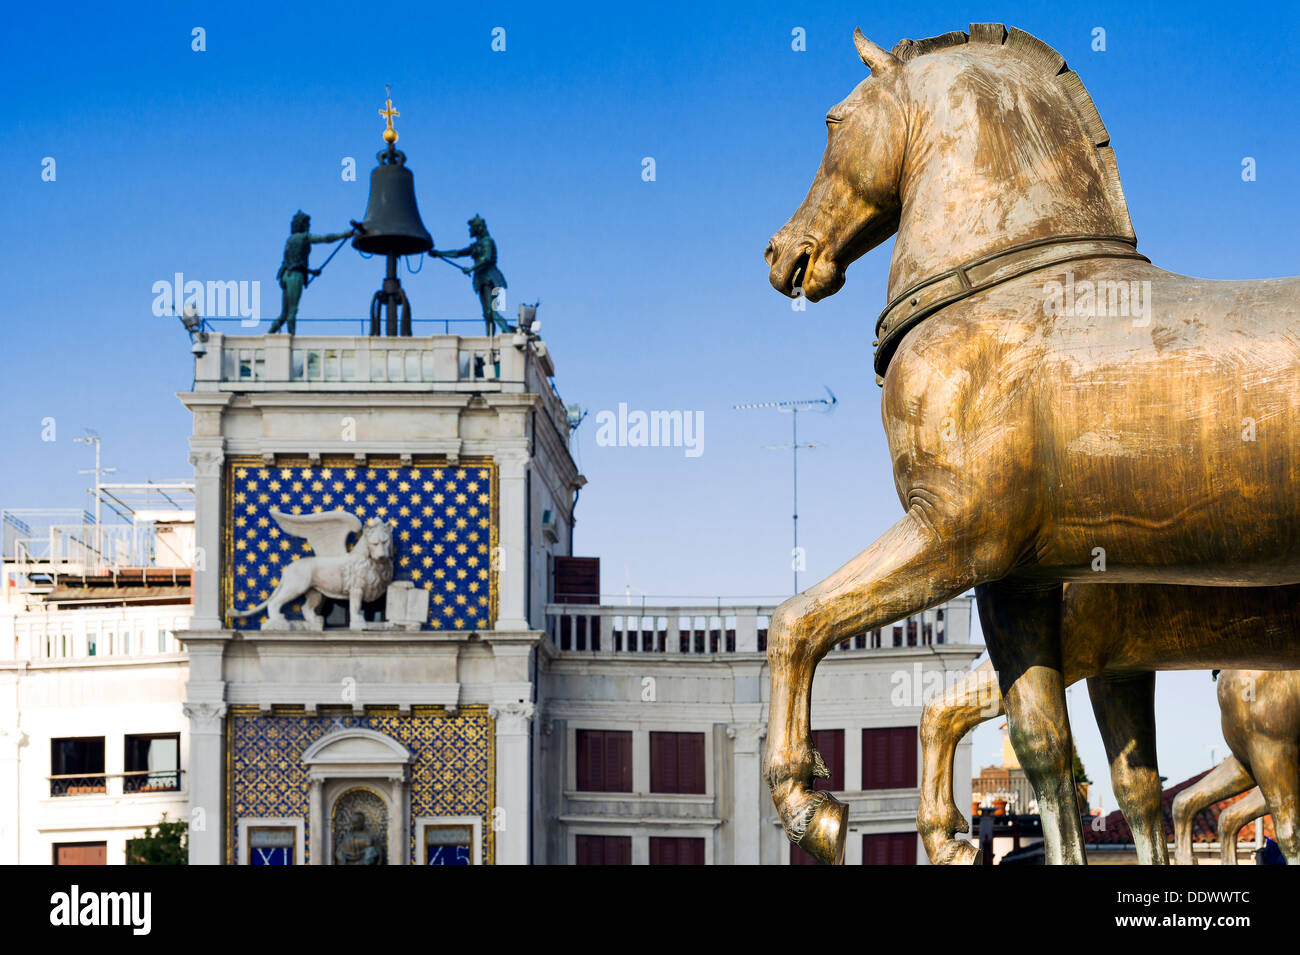 Europe, Italy, Veneto, Venice, classified as World Heritage by UNESCO. The clock tower and the automaton with the bronze horses. Stock Photo